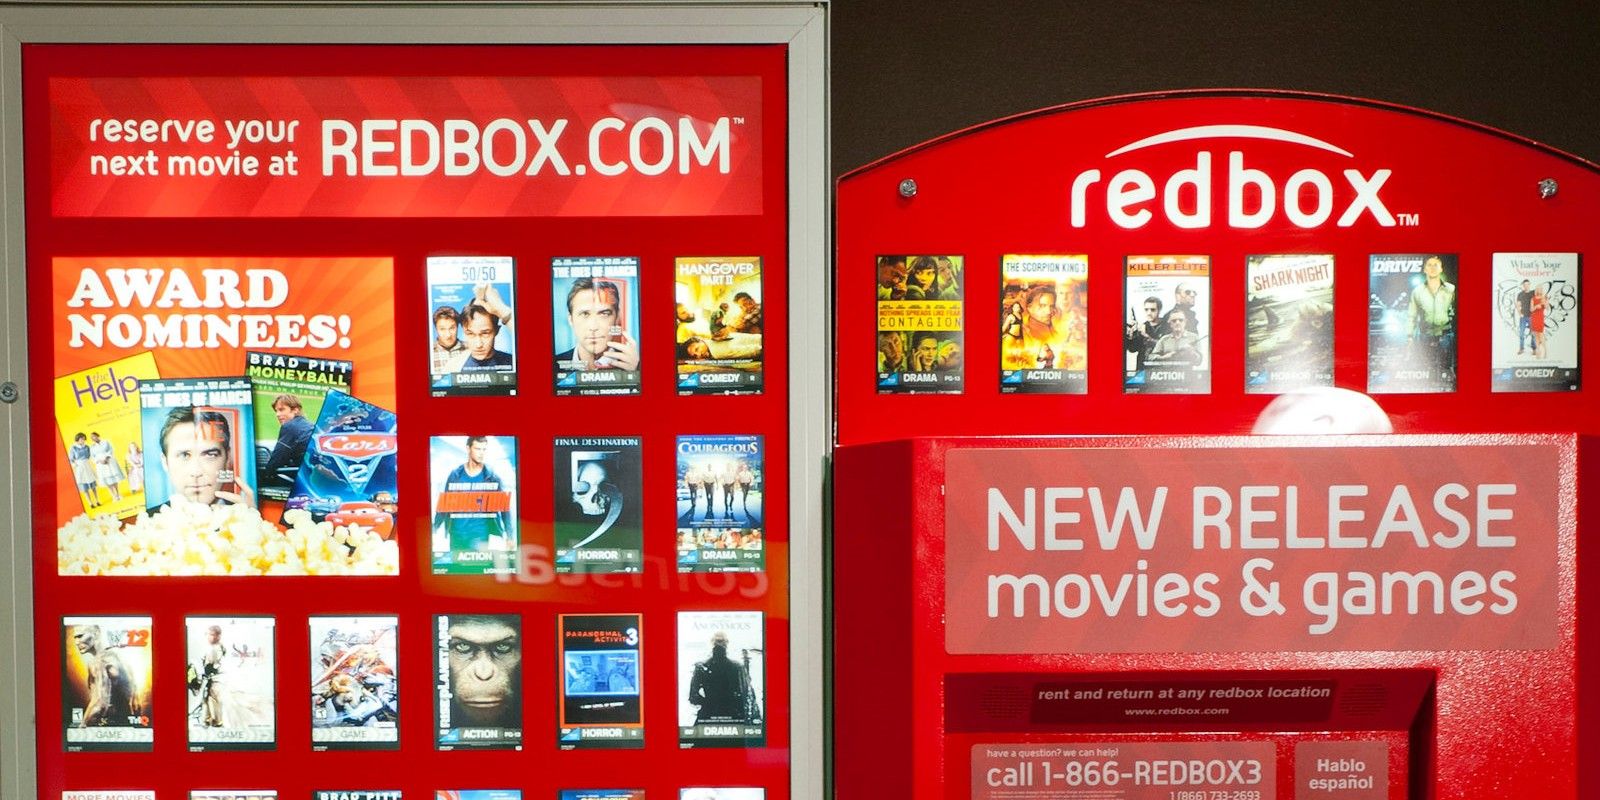 Redbox Is Now a Free, On Demand Movie Streaming Service